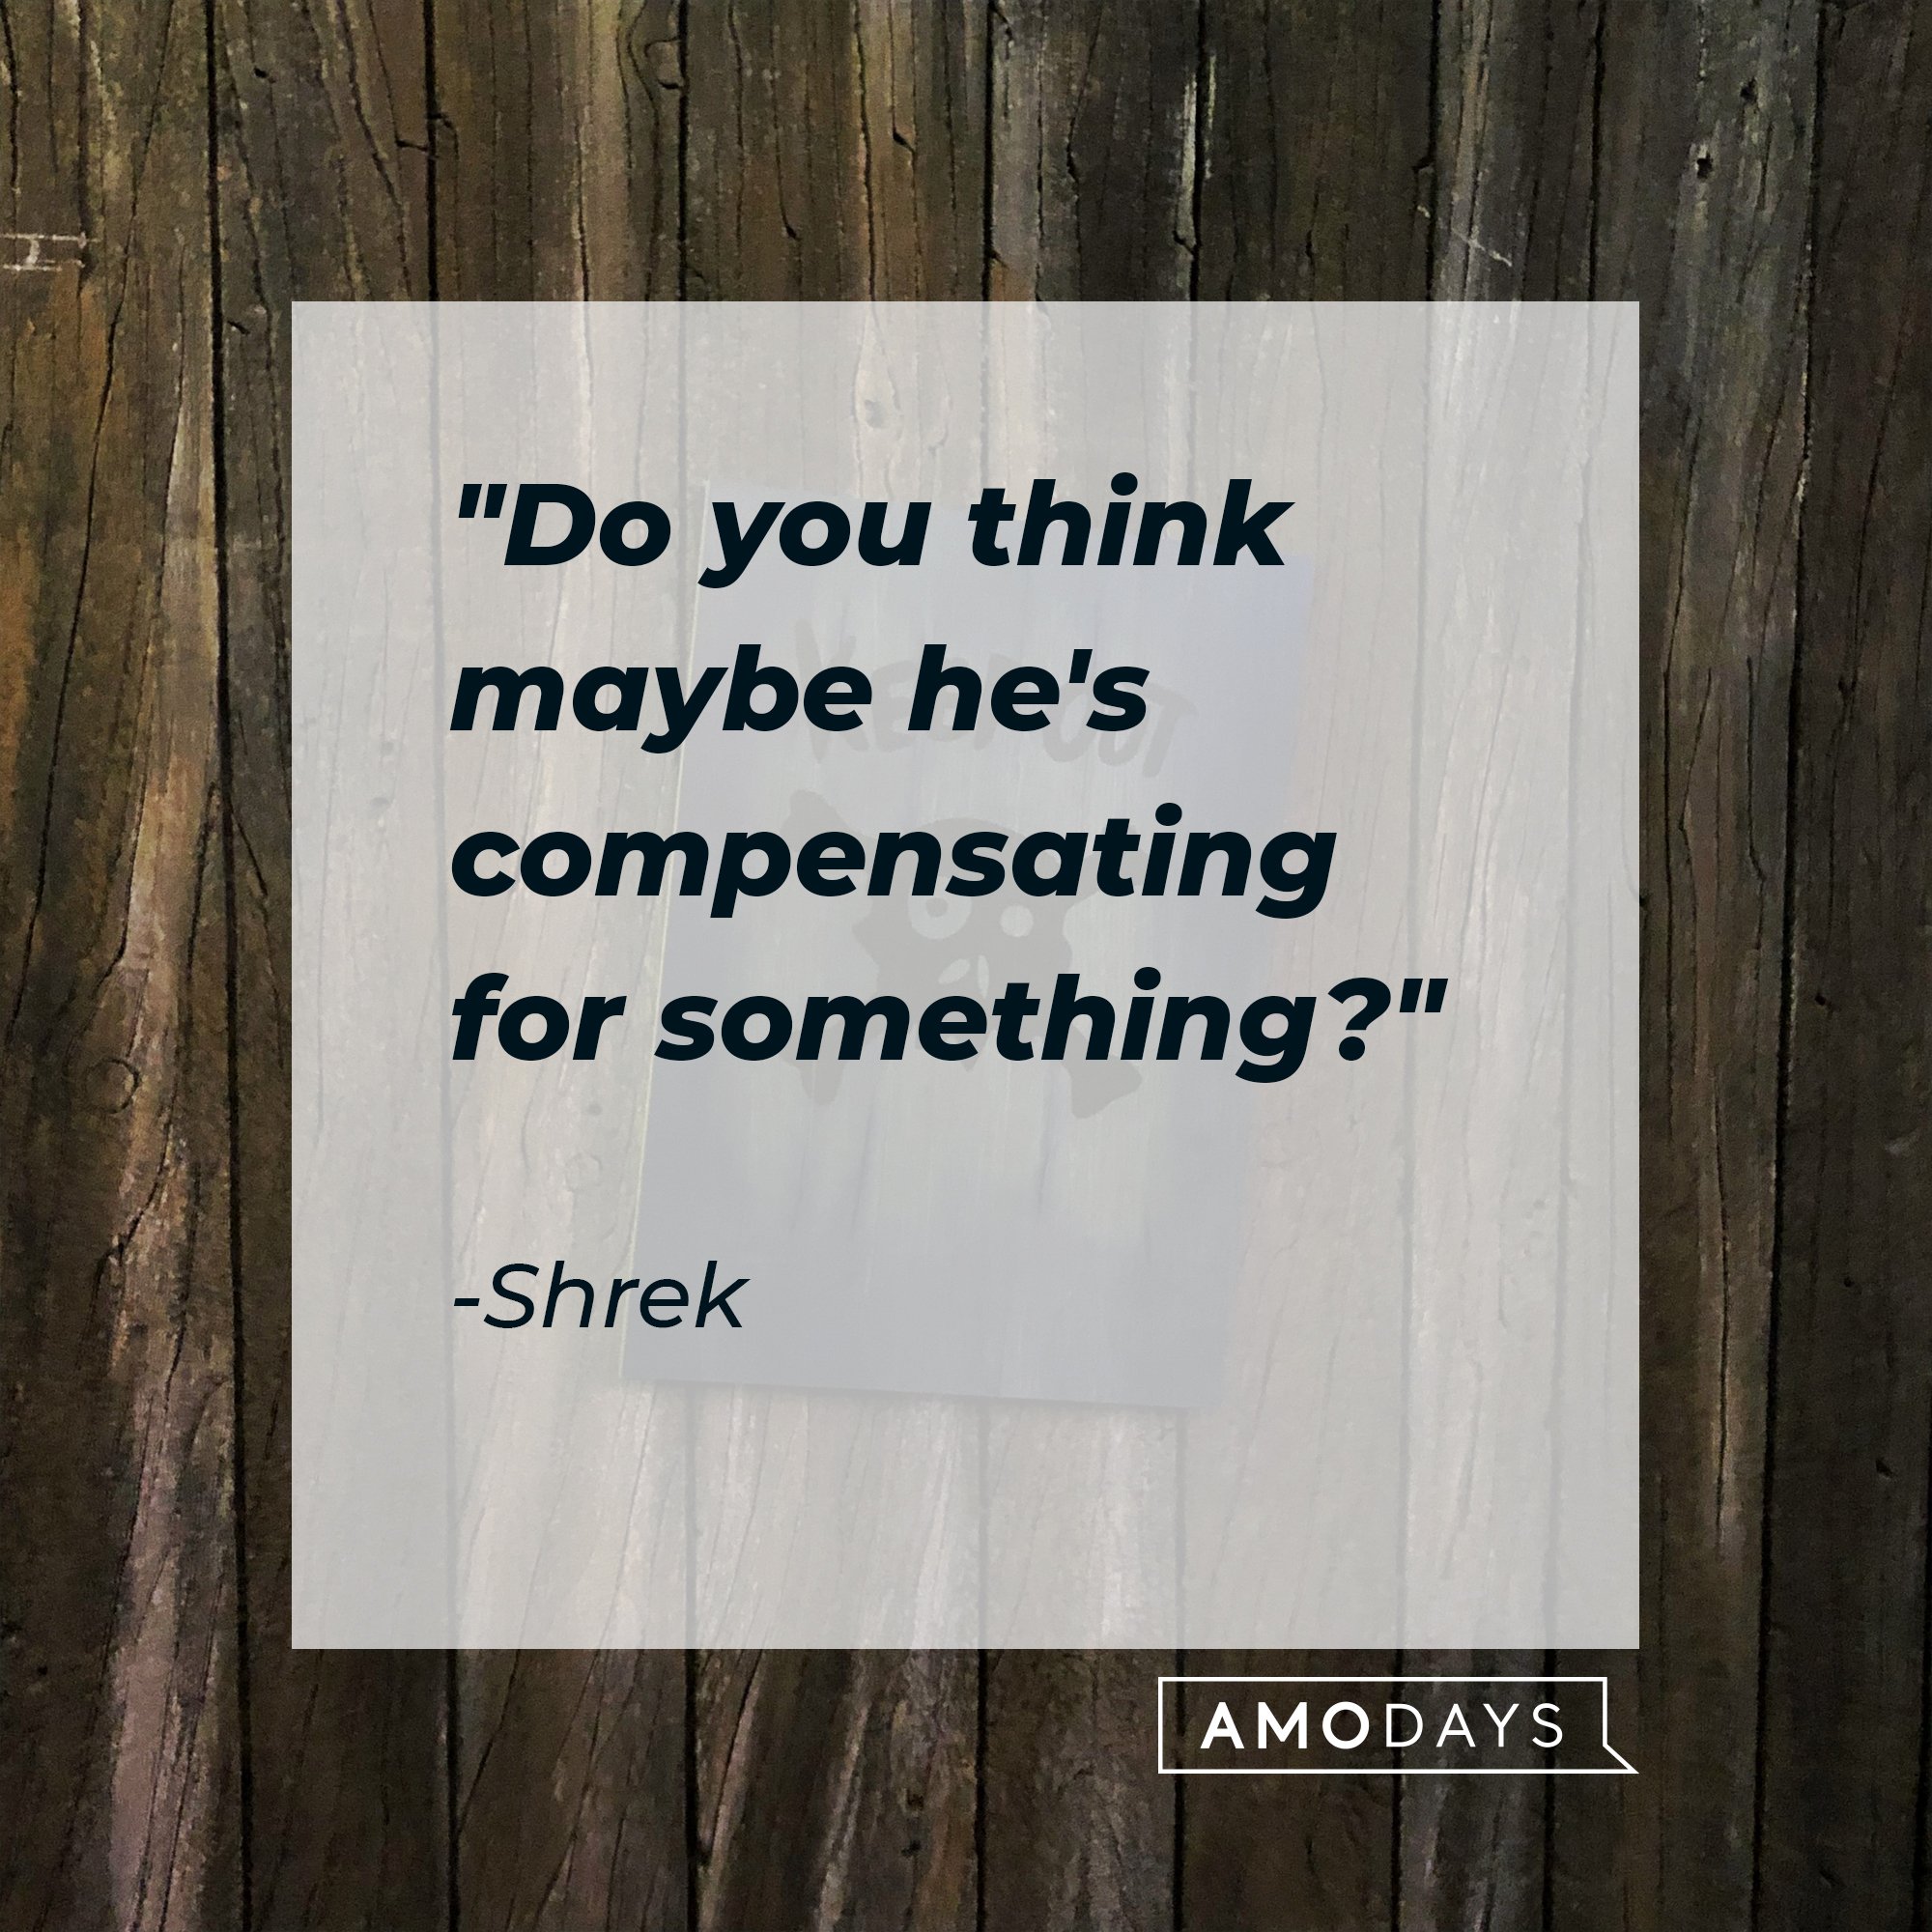 Shrek's quote: "Do you think maybe he's compensating for something?" | Image: AmoDays